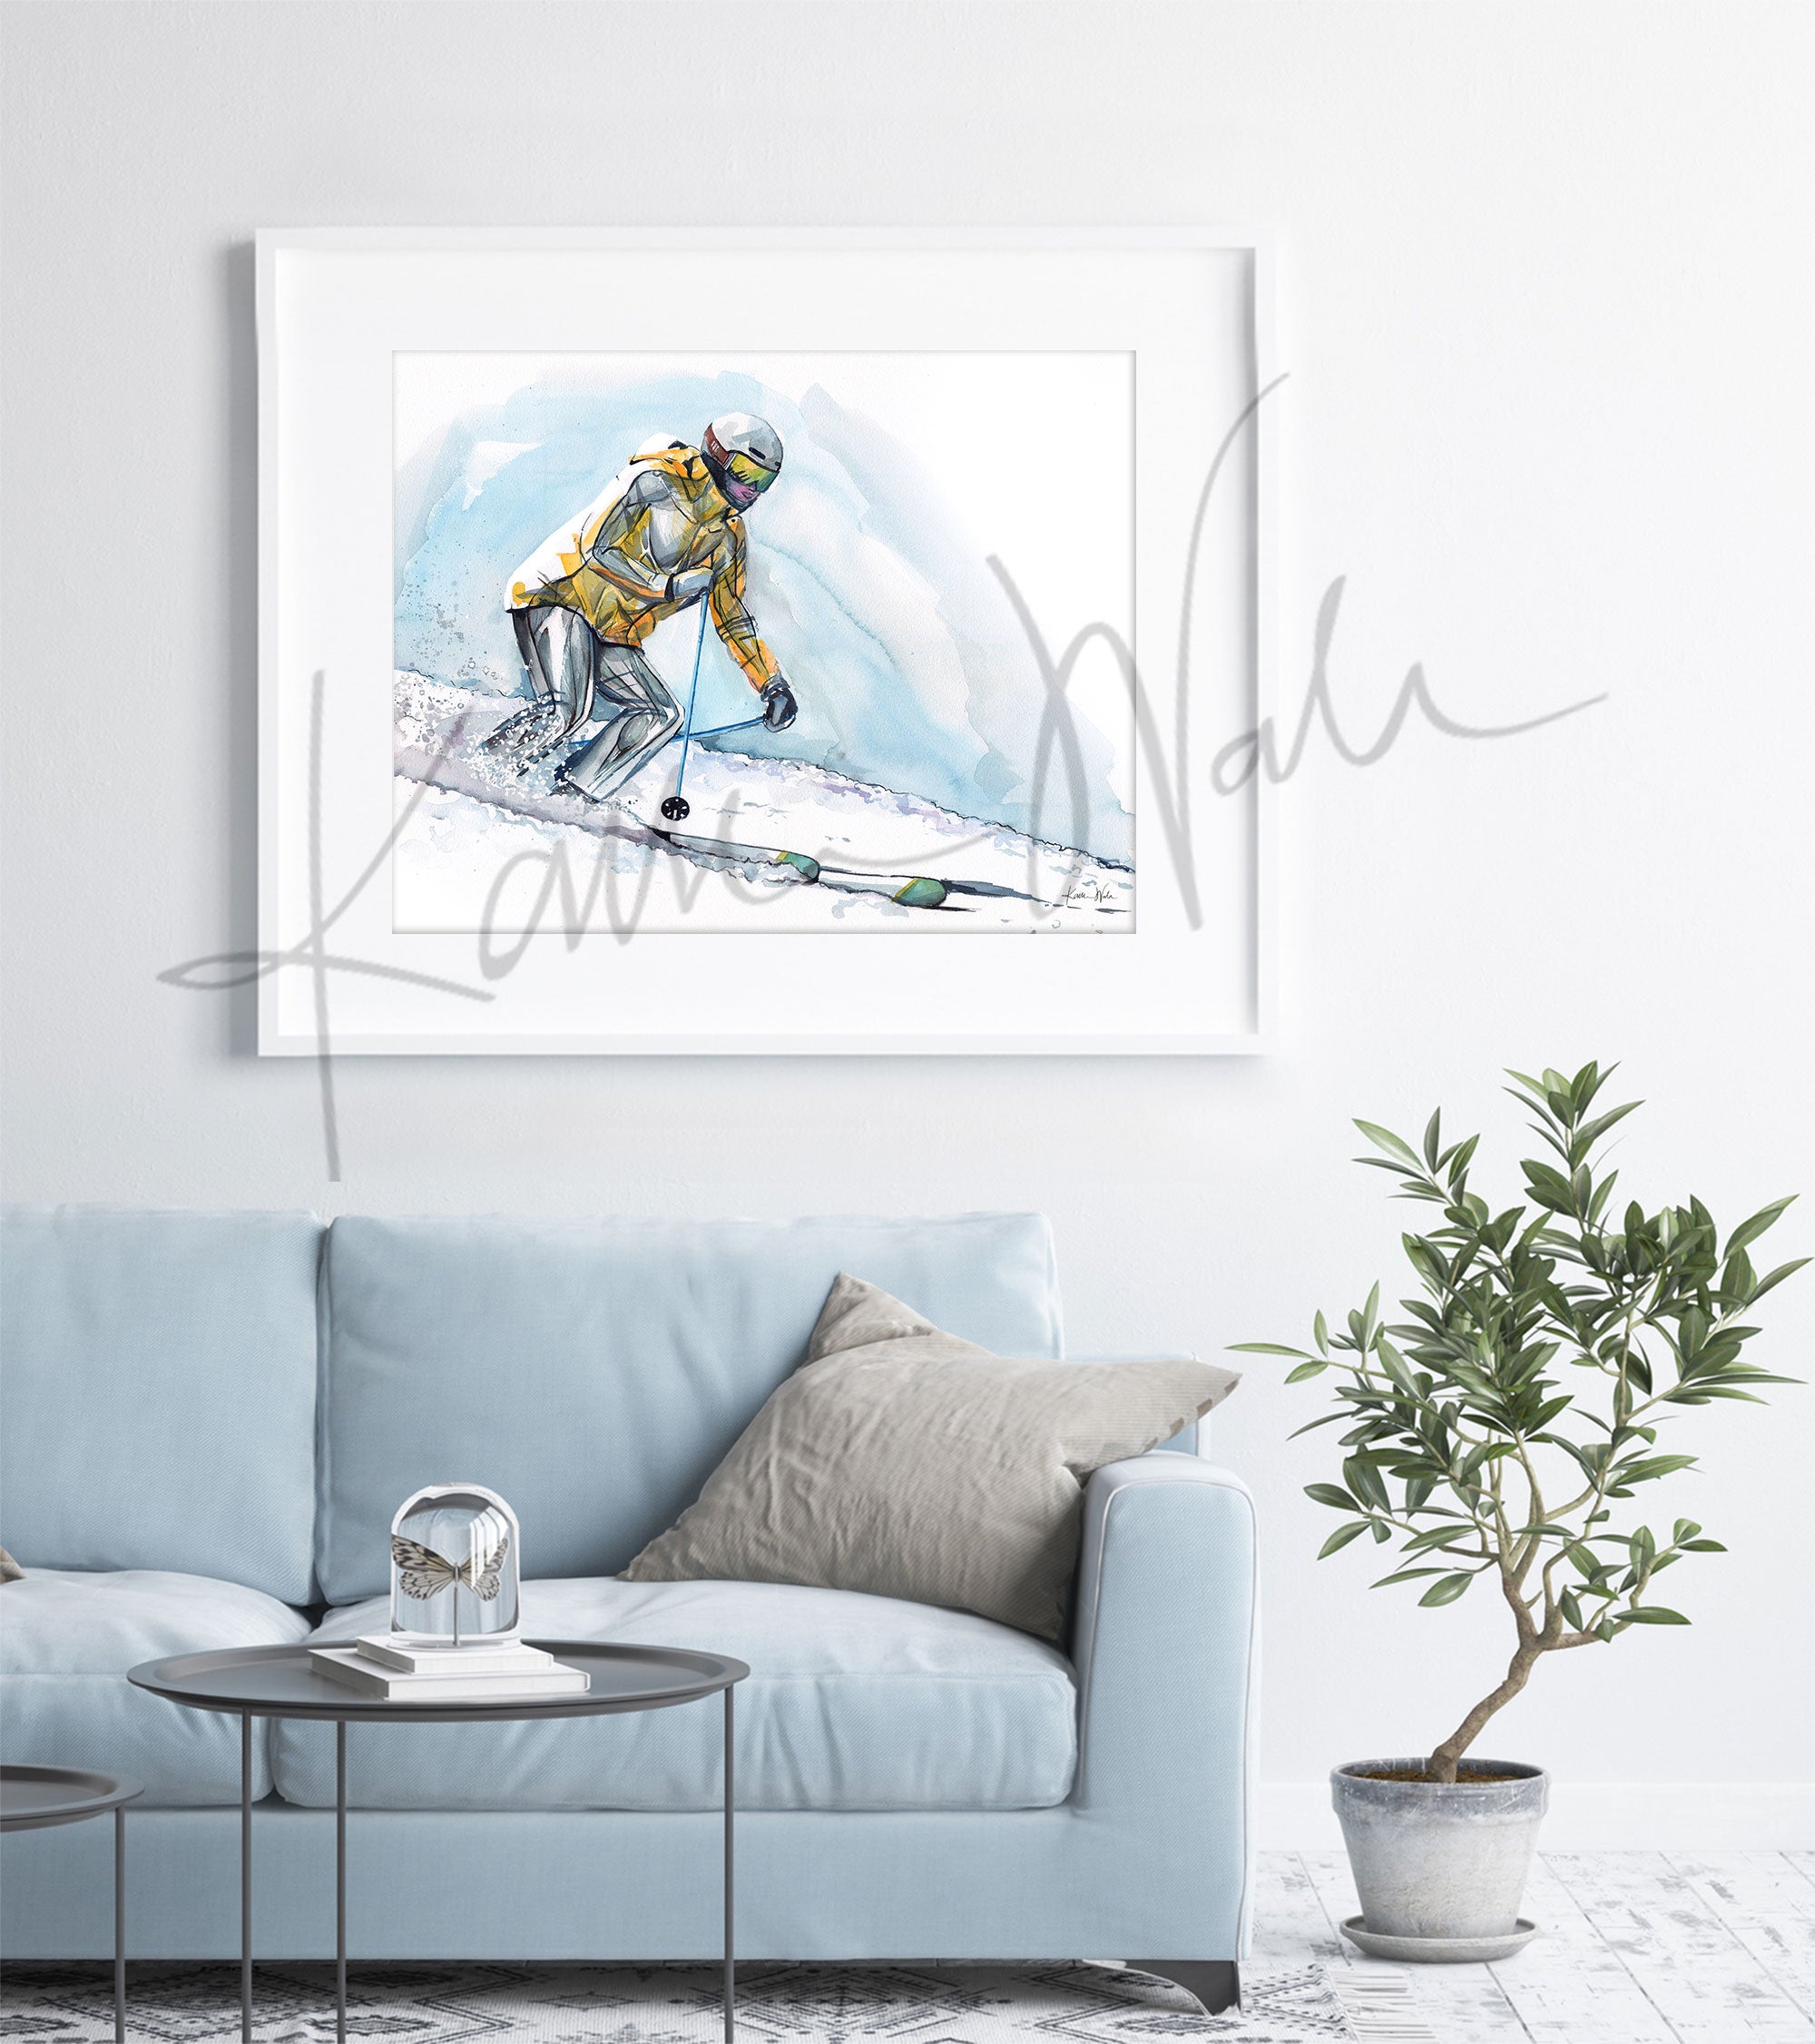 Framed watercolor painting of a skier going down a ski hill with their muscle anatomy showing under their clothing. The painting is hanging over a blue couch.